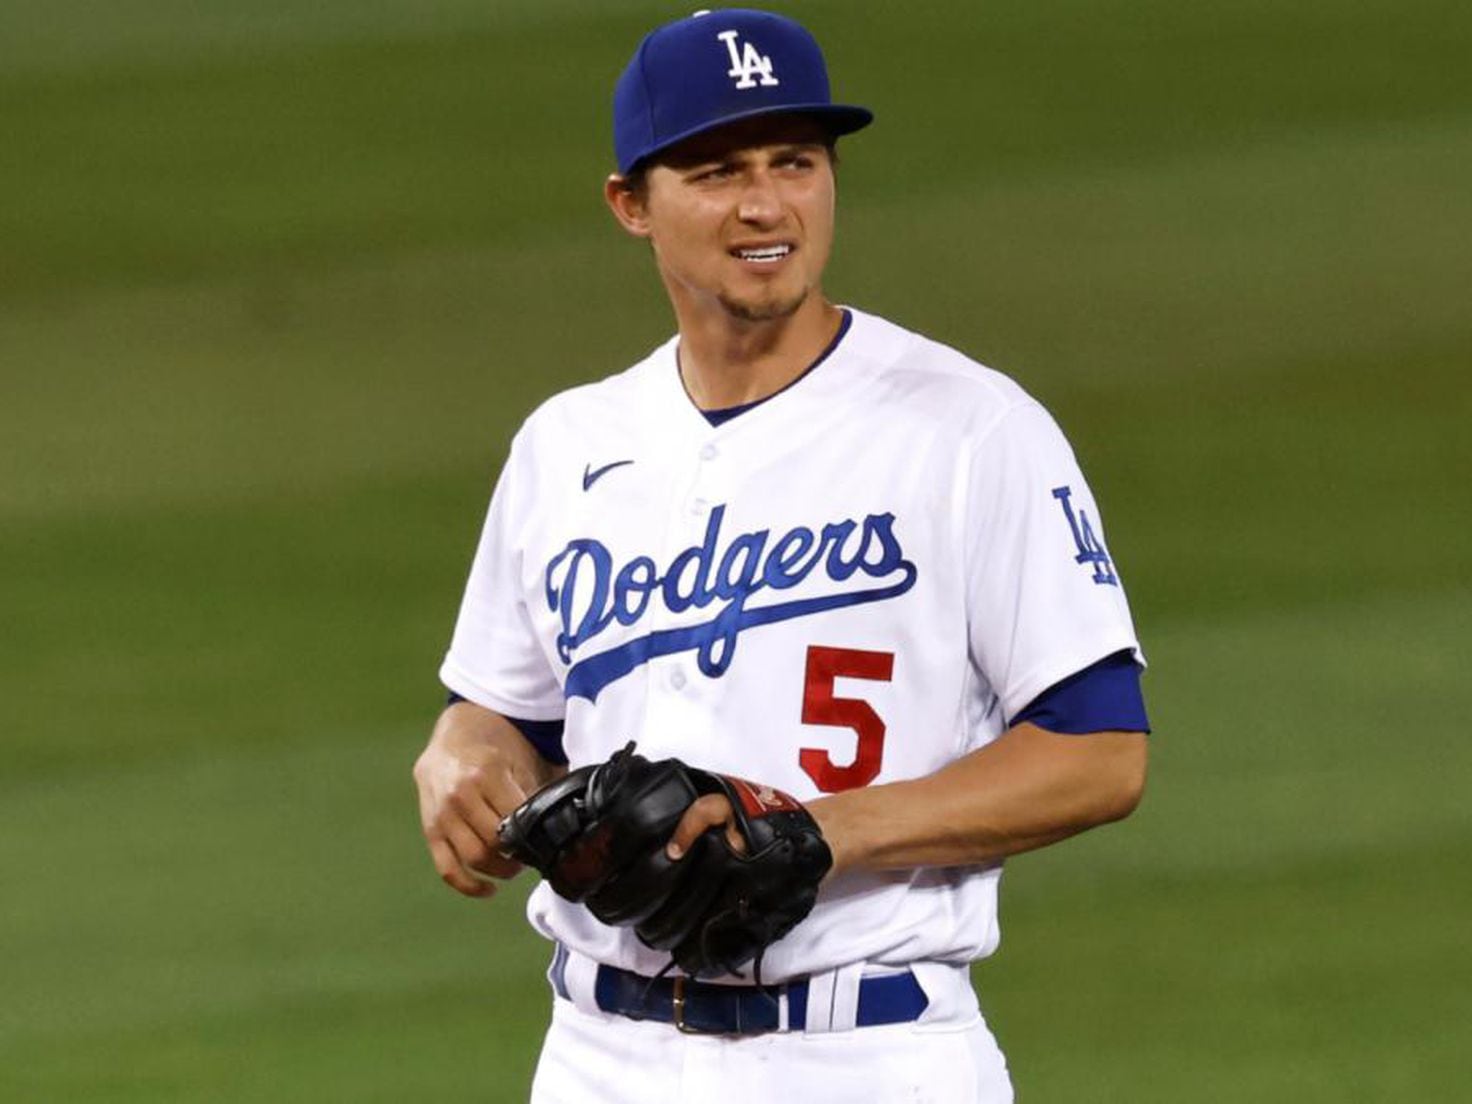 Corey Seager Net Worth